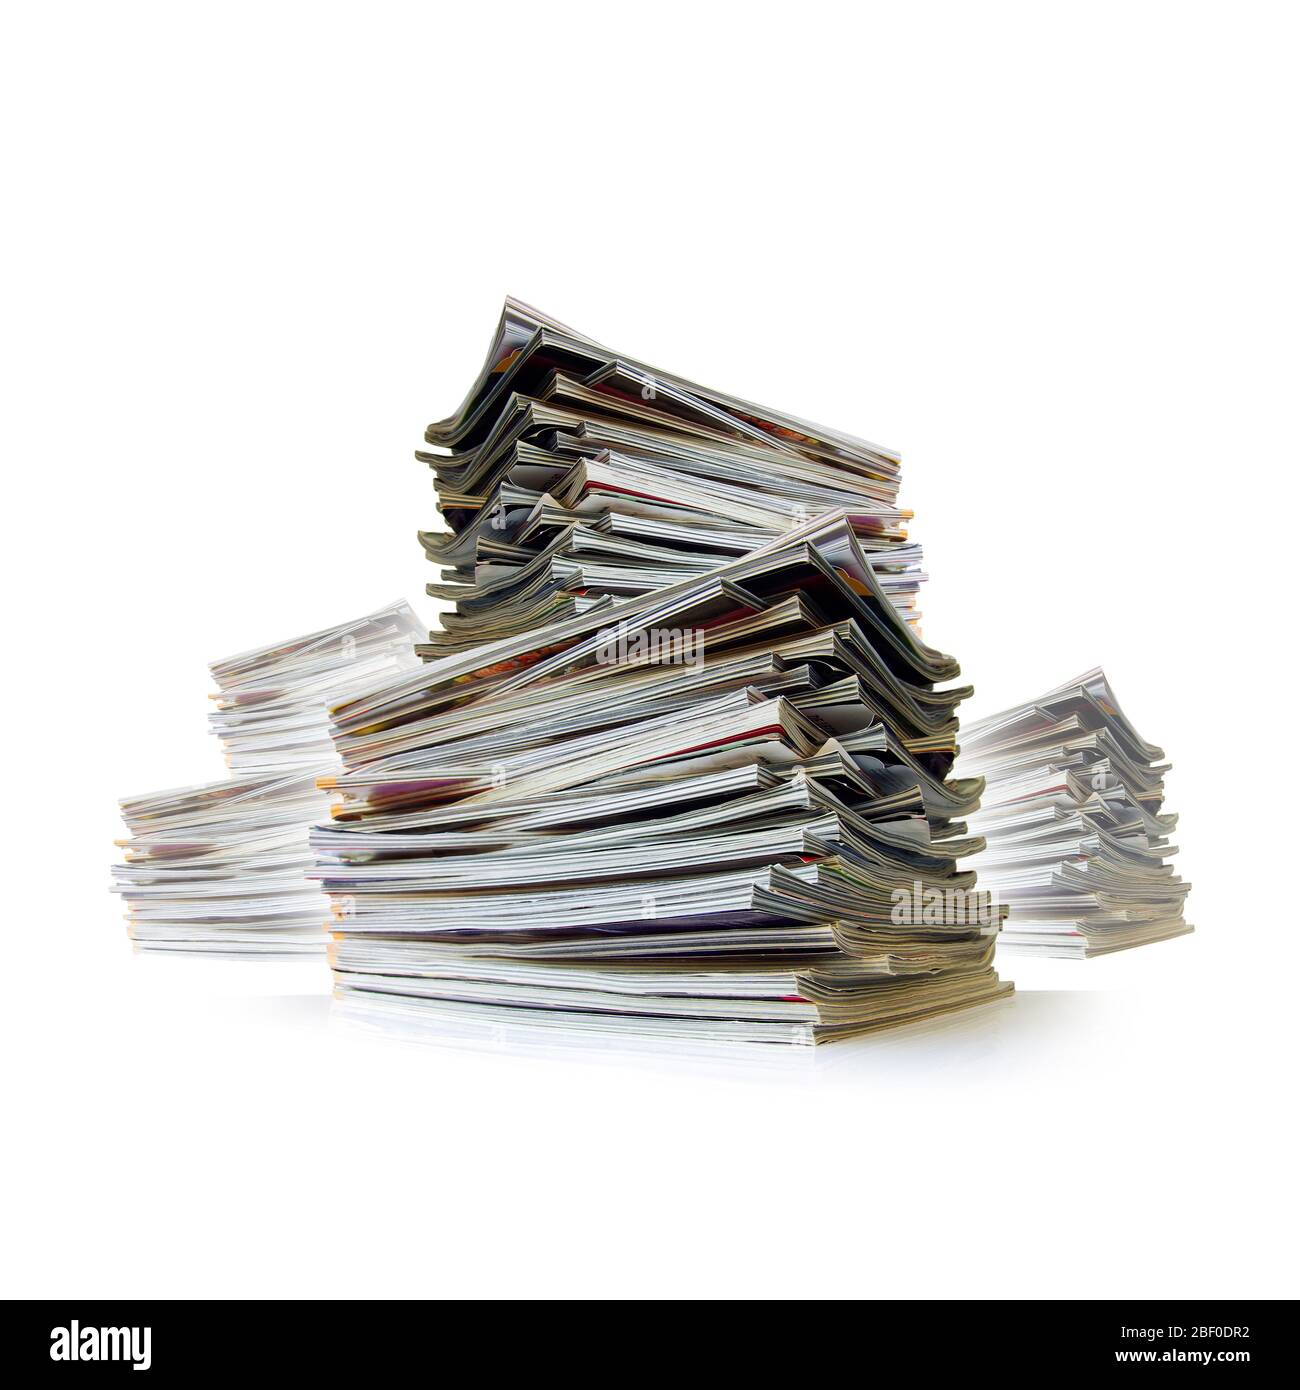 Closeup of messy piles of old magazines with bending pages Stock Photo